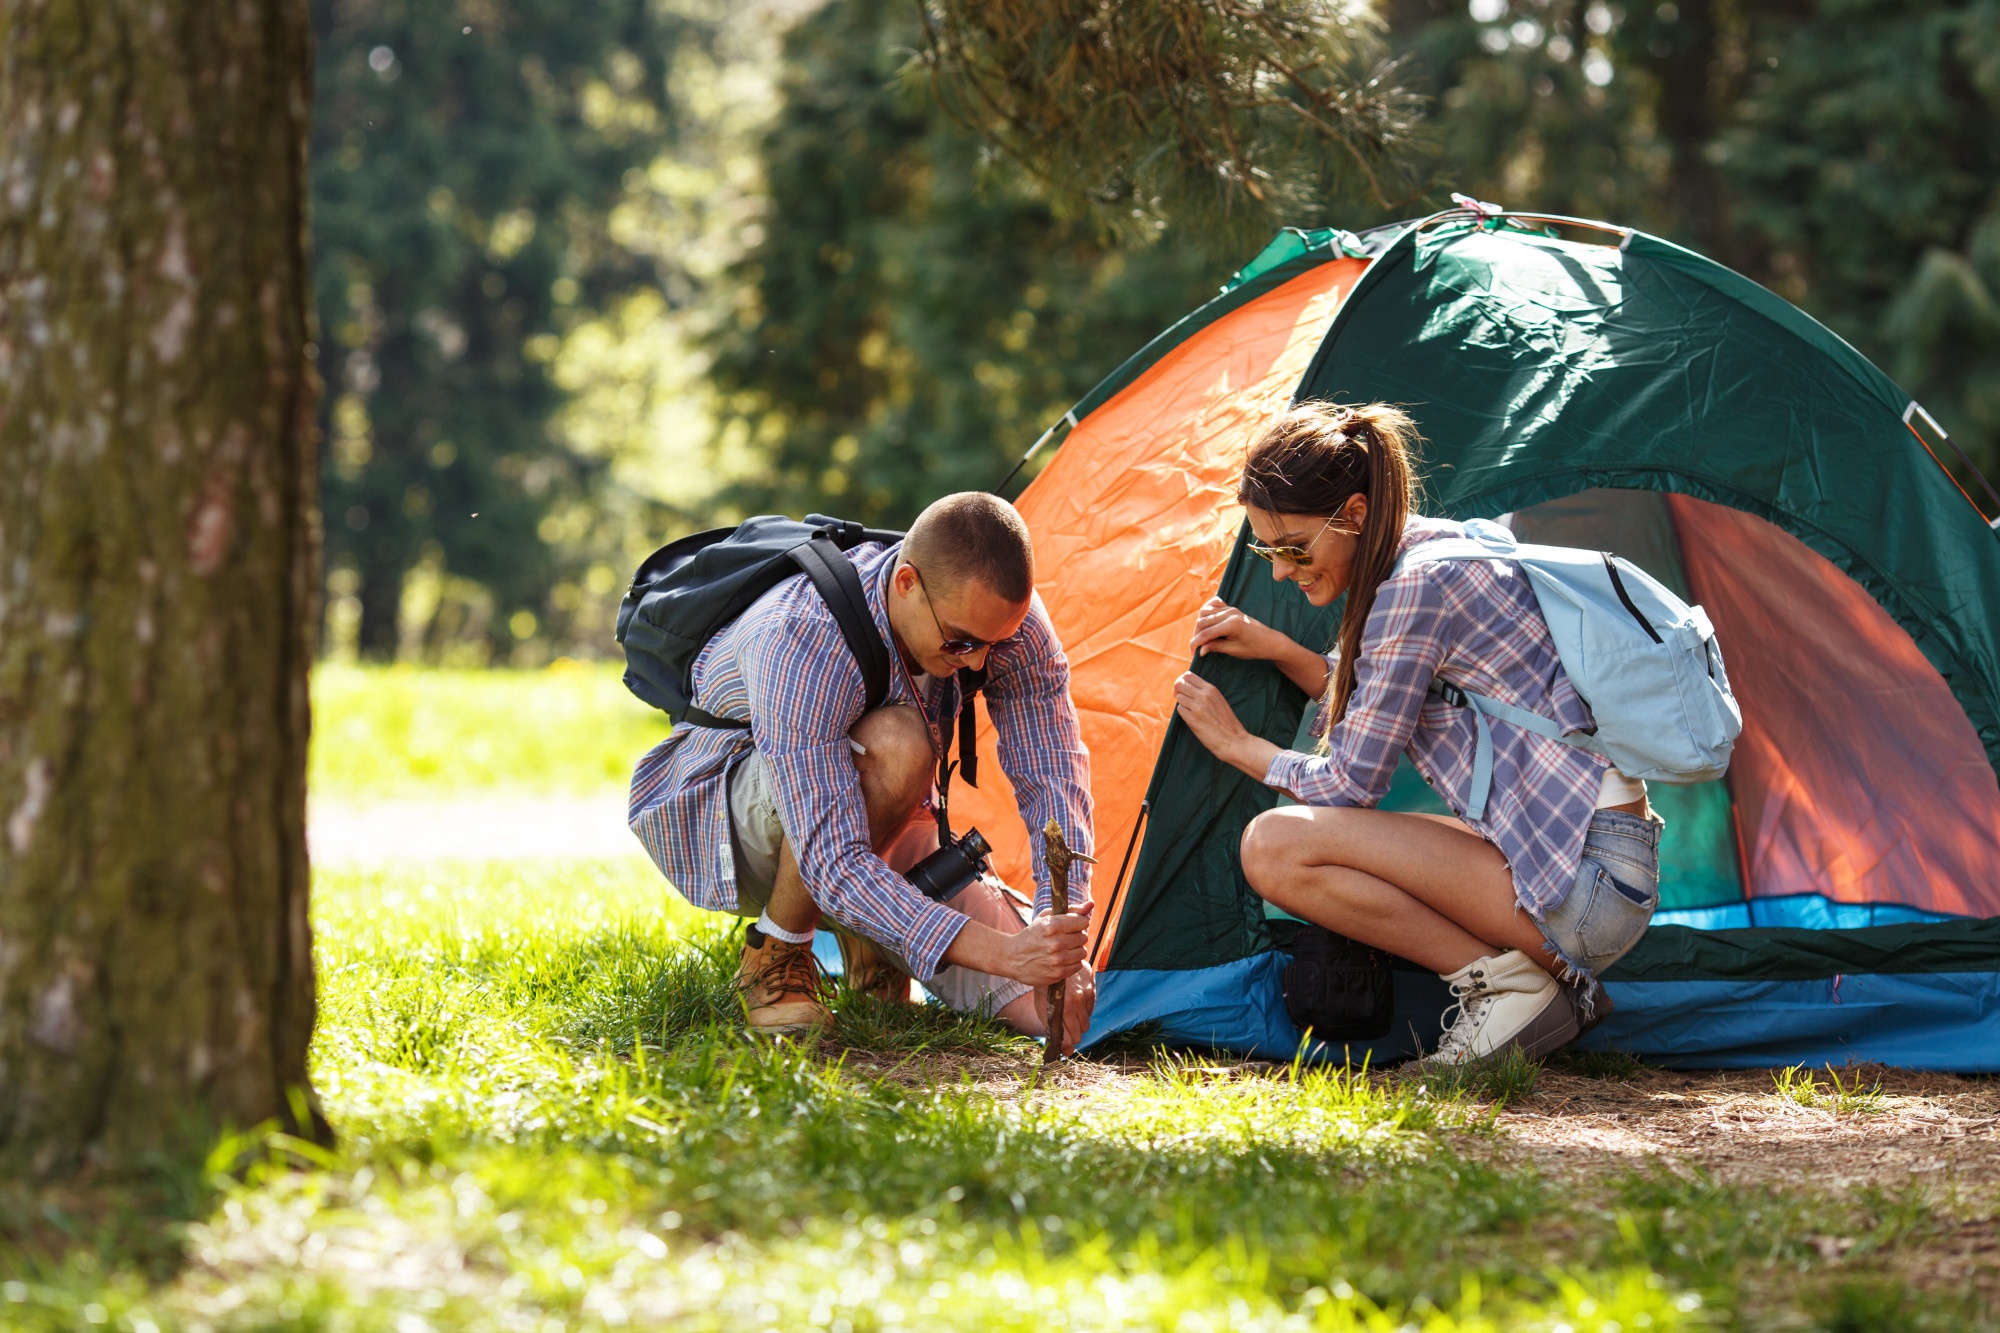 How to Plan a Camping Trip in 5 Easy Steps